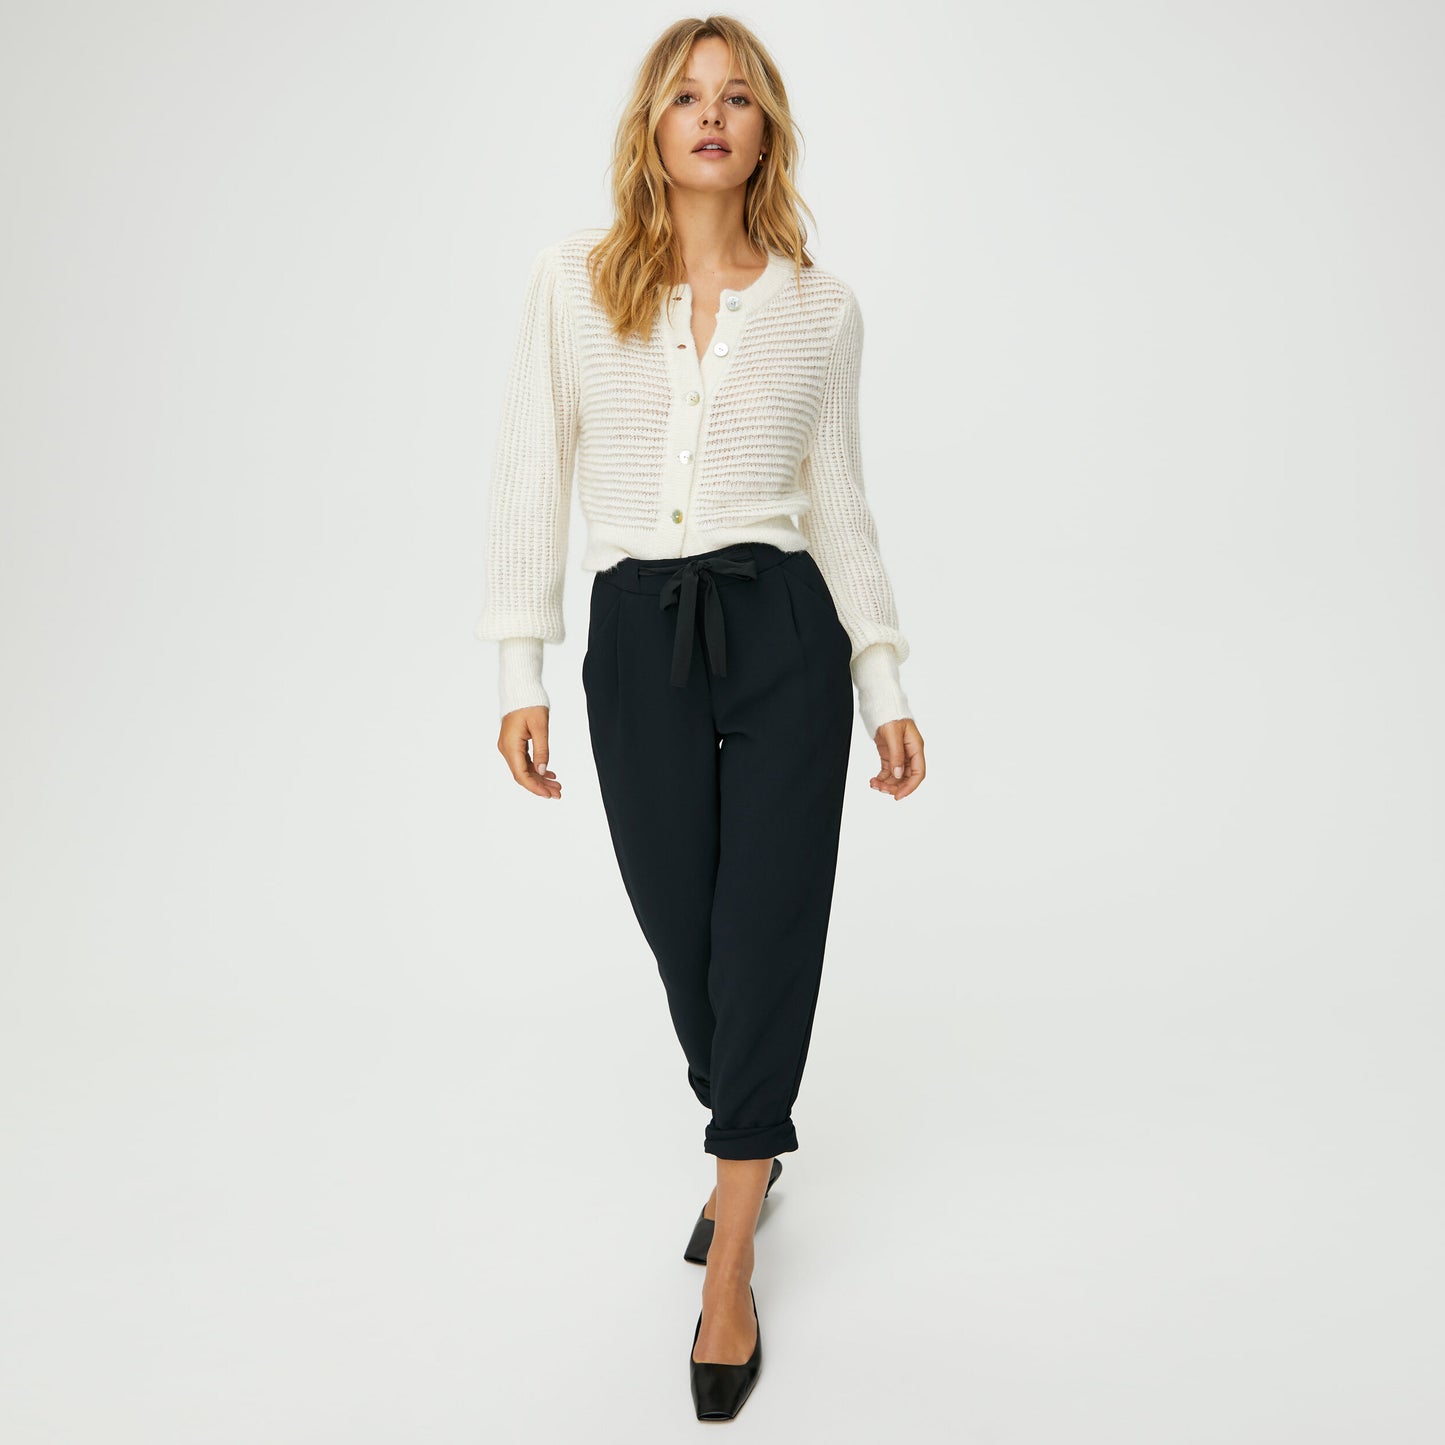 Wilfred Allant Cropped Trouser - size 4